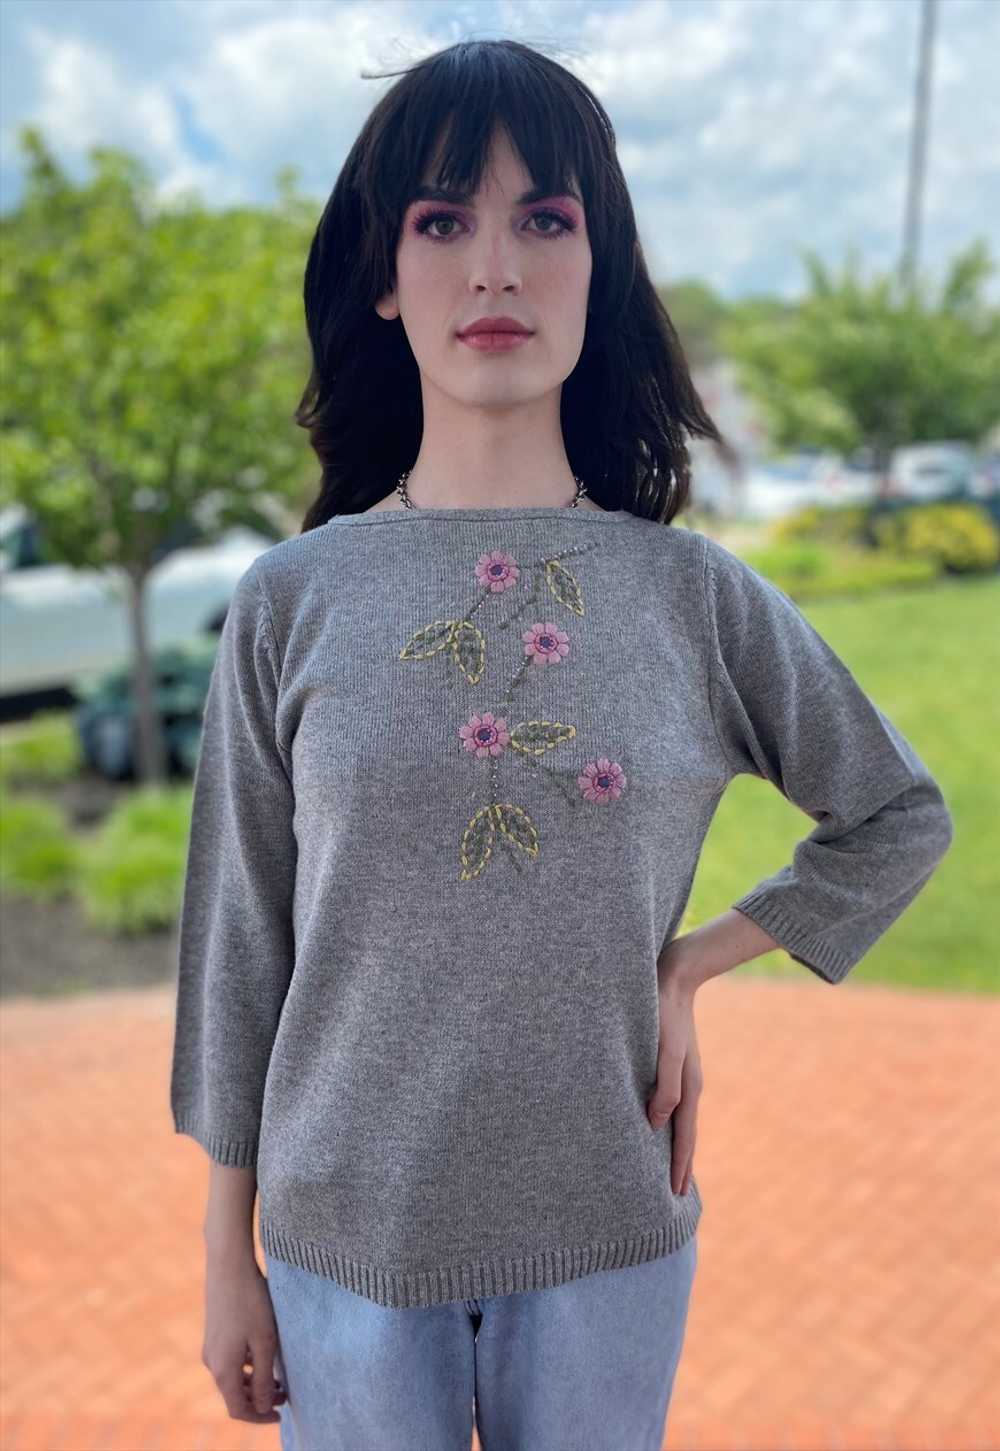 New Vintage 90s Sweater with Floral Embroidery. - image 2